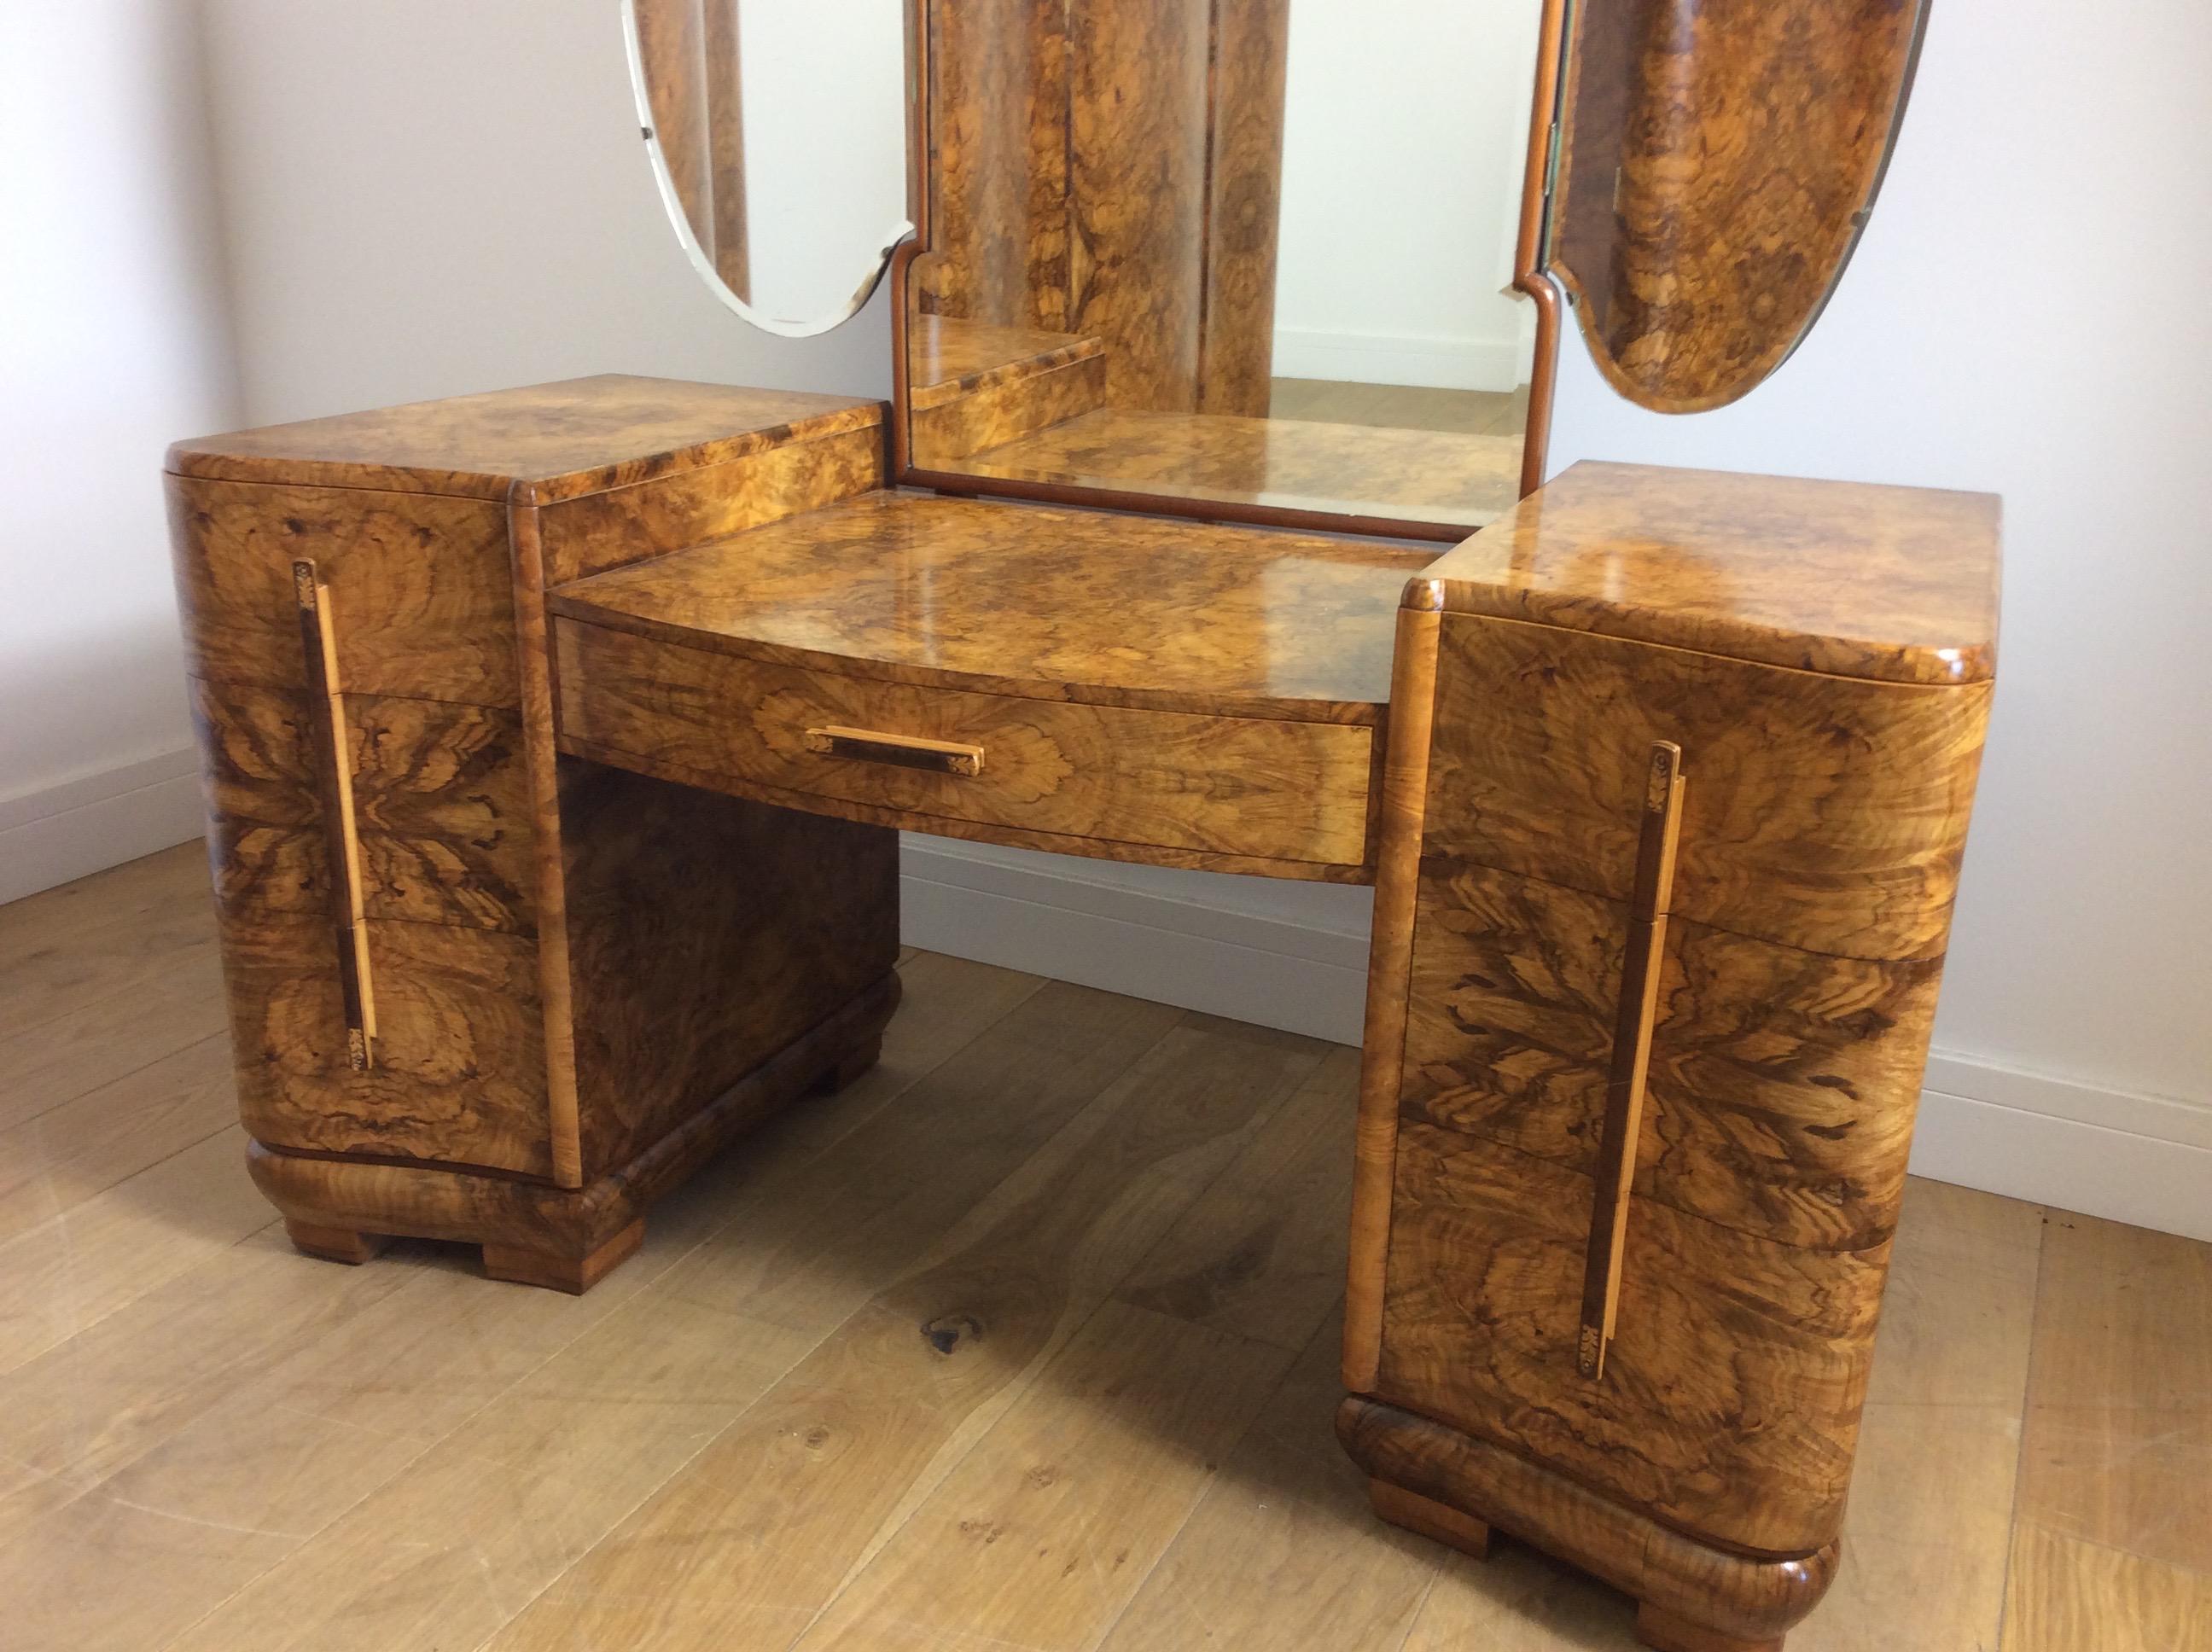 British Art Deco Dressing Table with Cloud Shape Mirror